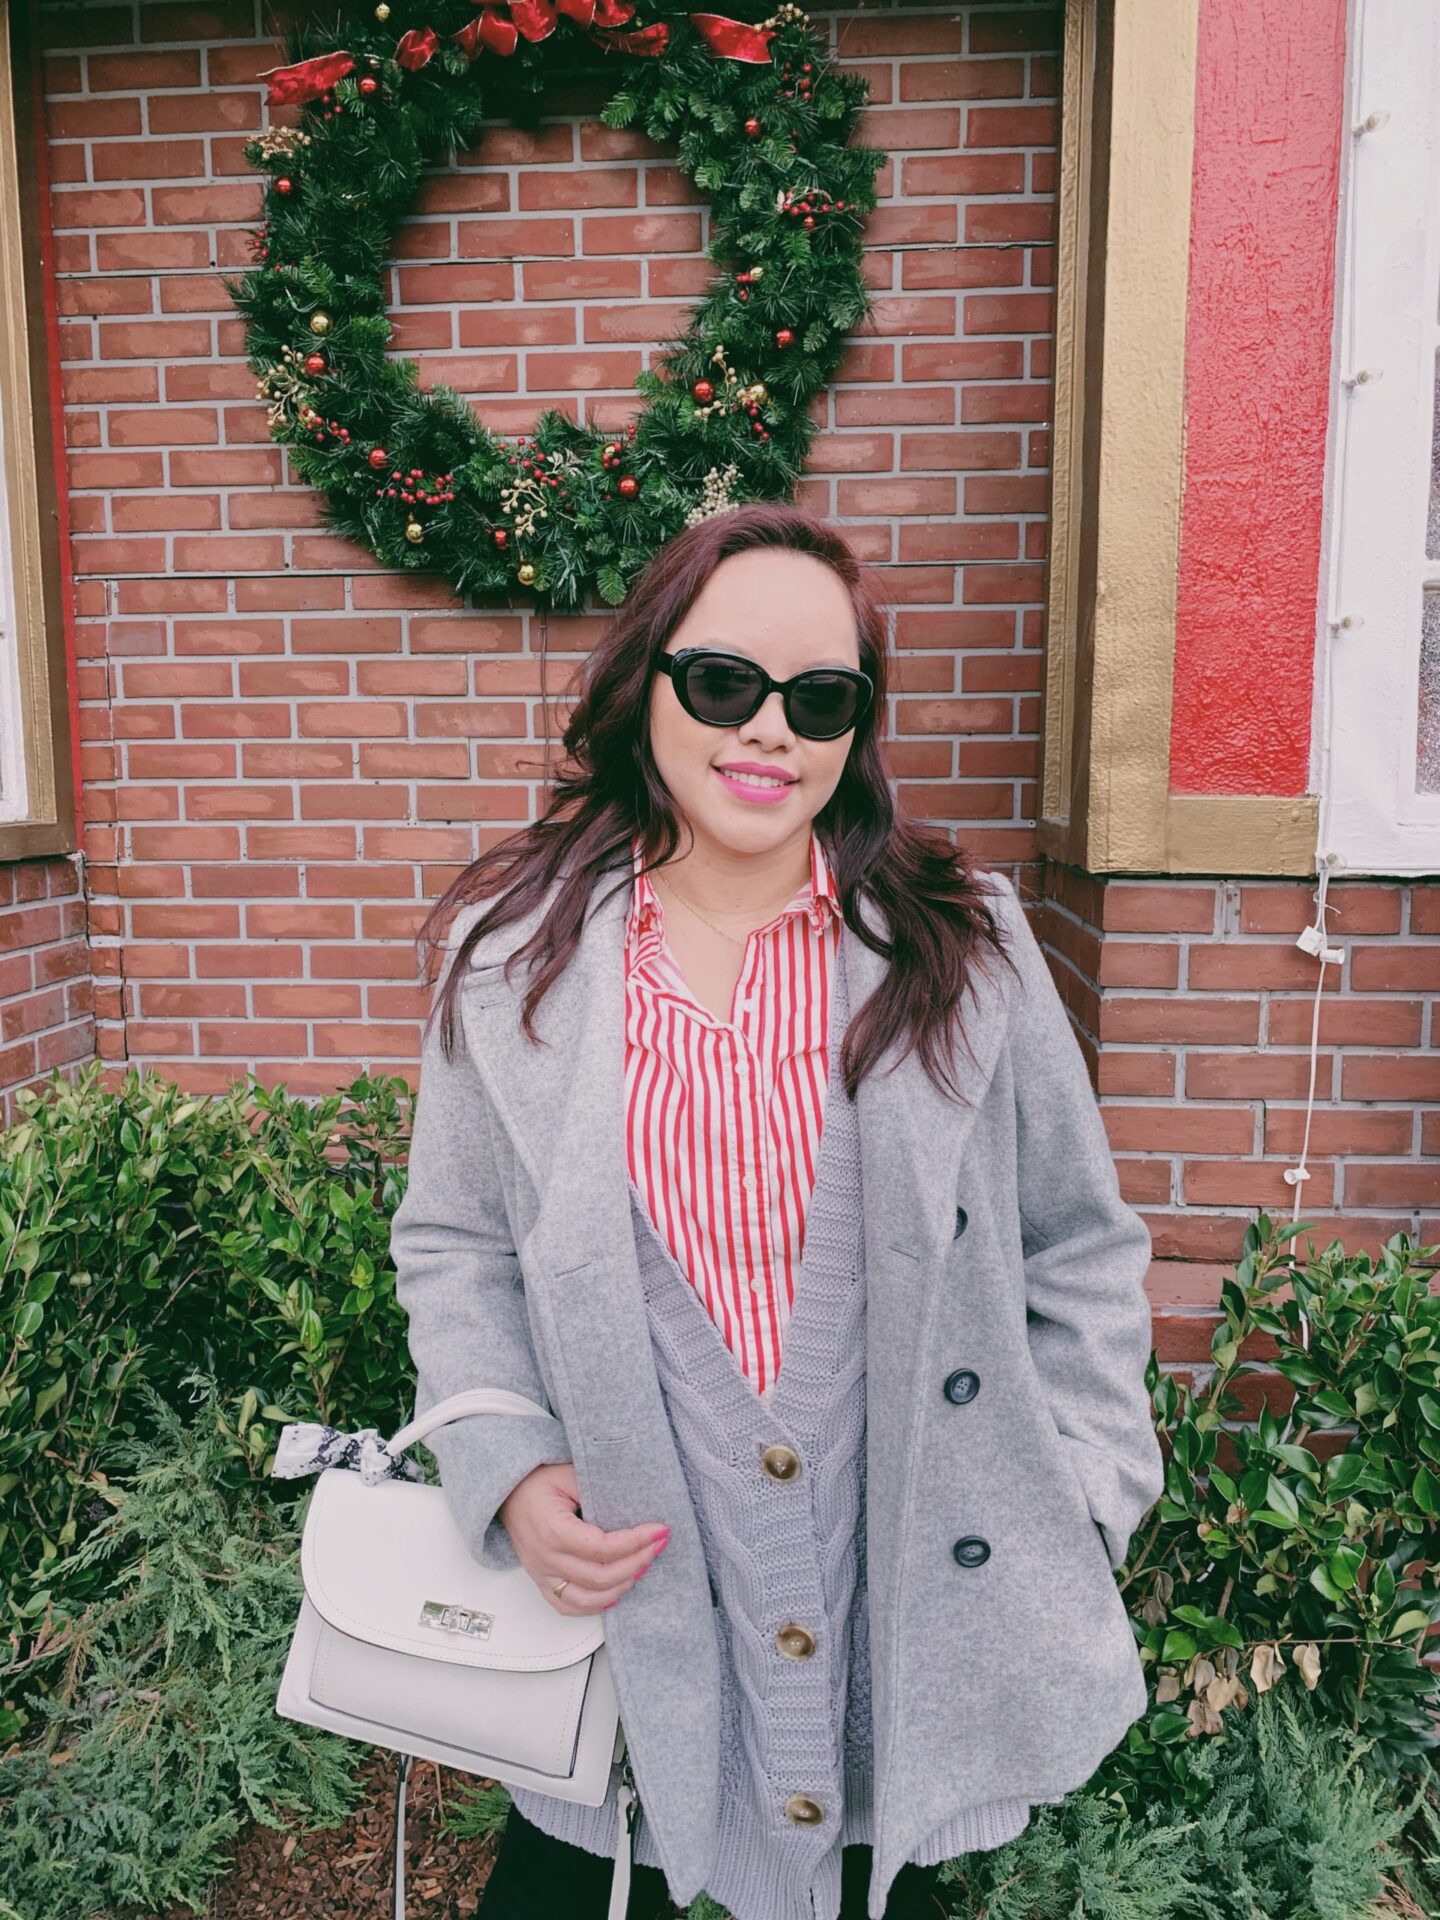 Heart's Desire, instagram-pslilyboutique-los-angeles-fashion-blogger-christmas-wreath-ideas-2019-red-H&M-stripe-shirt-white-steve-madden-bag-winter-style-2019-layers-cute-winter-outfits